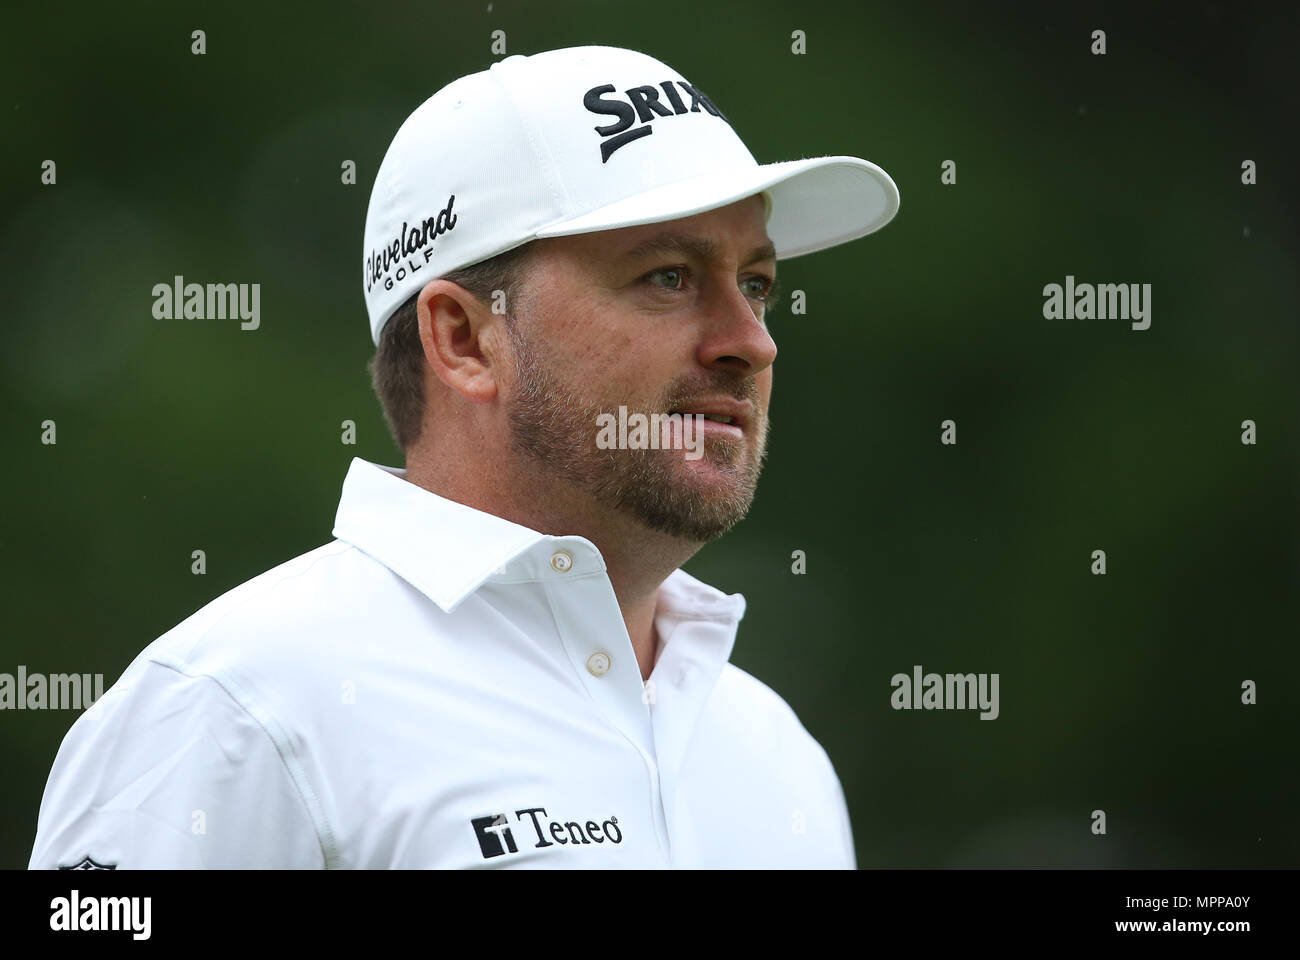 Wentworth Golf Club, Surrey, UK. 24th May 2018. Graeme McDowell of Norther Ireland during the Day 1 of the BMW PGA Championship at Wentworth Golf Club on May 24, 2018 in Surrey, England Credit: Paul Terry Photo/Alamy Live News Stock Photo